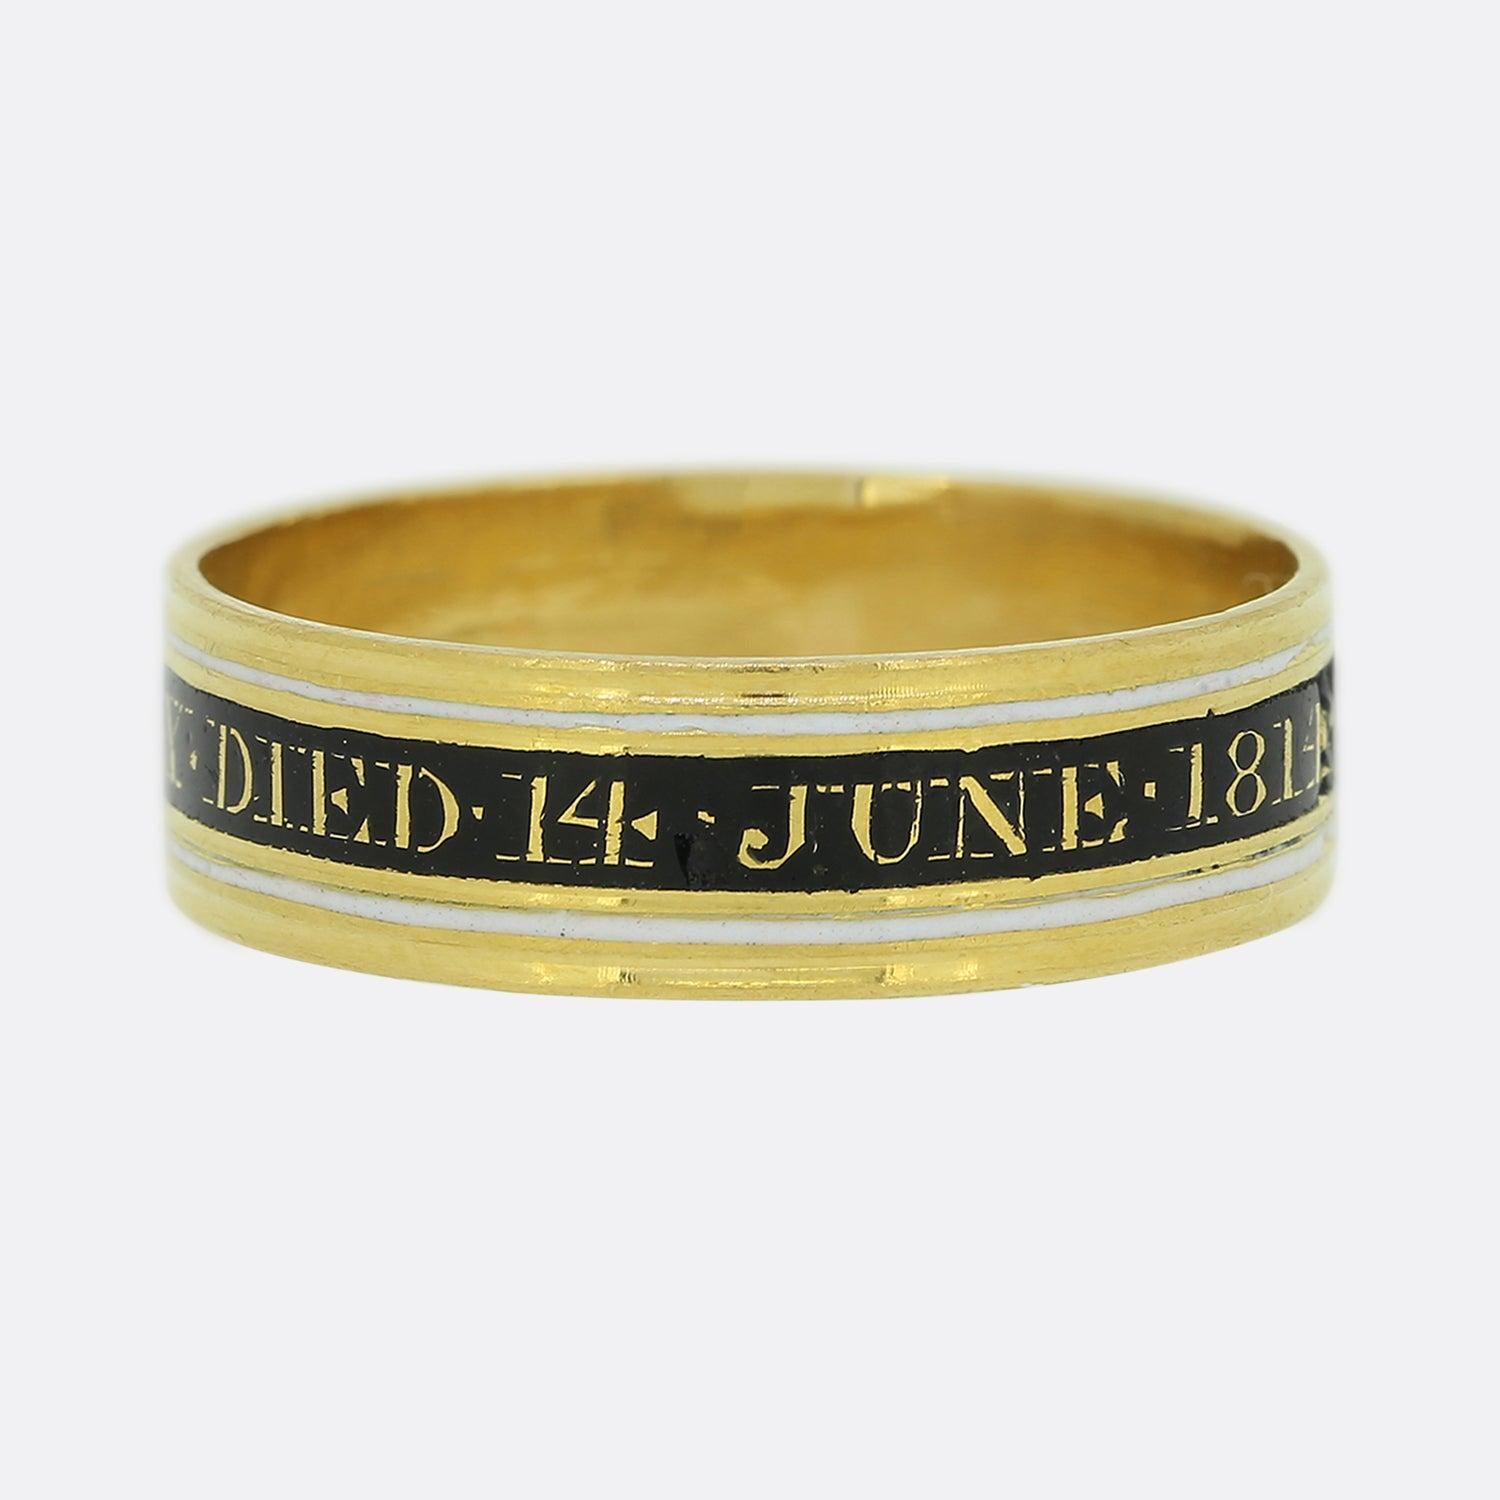 Here we have a wonderful 15ct yellow gold mourning ring from the late Georgian era. This piece has been expertly enamelled in black, white and gold around the mid section of band and finished with the following words:

'ELIZ WEEKLY DIED 14 JUNE 1814